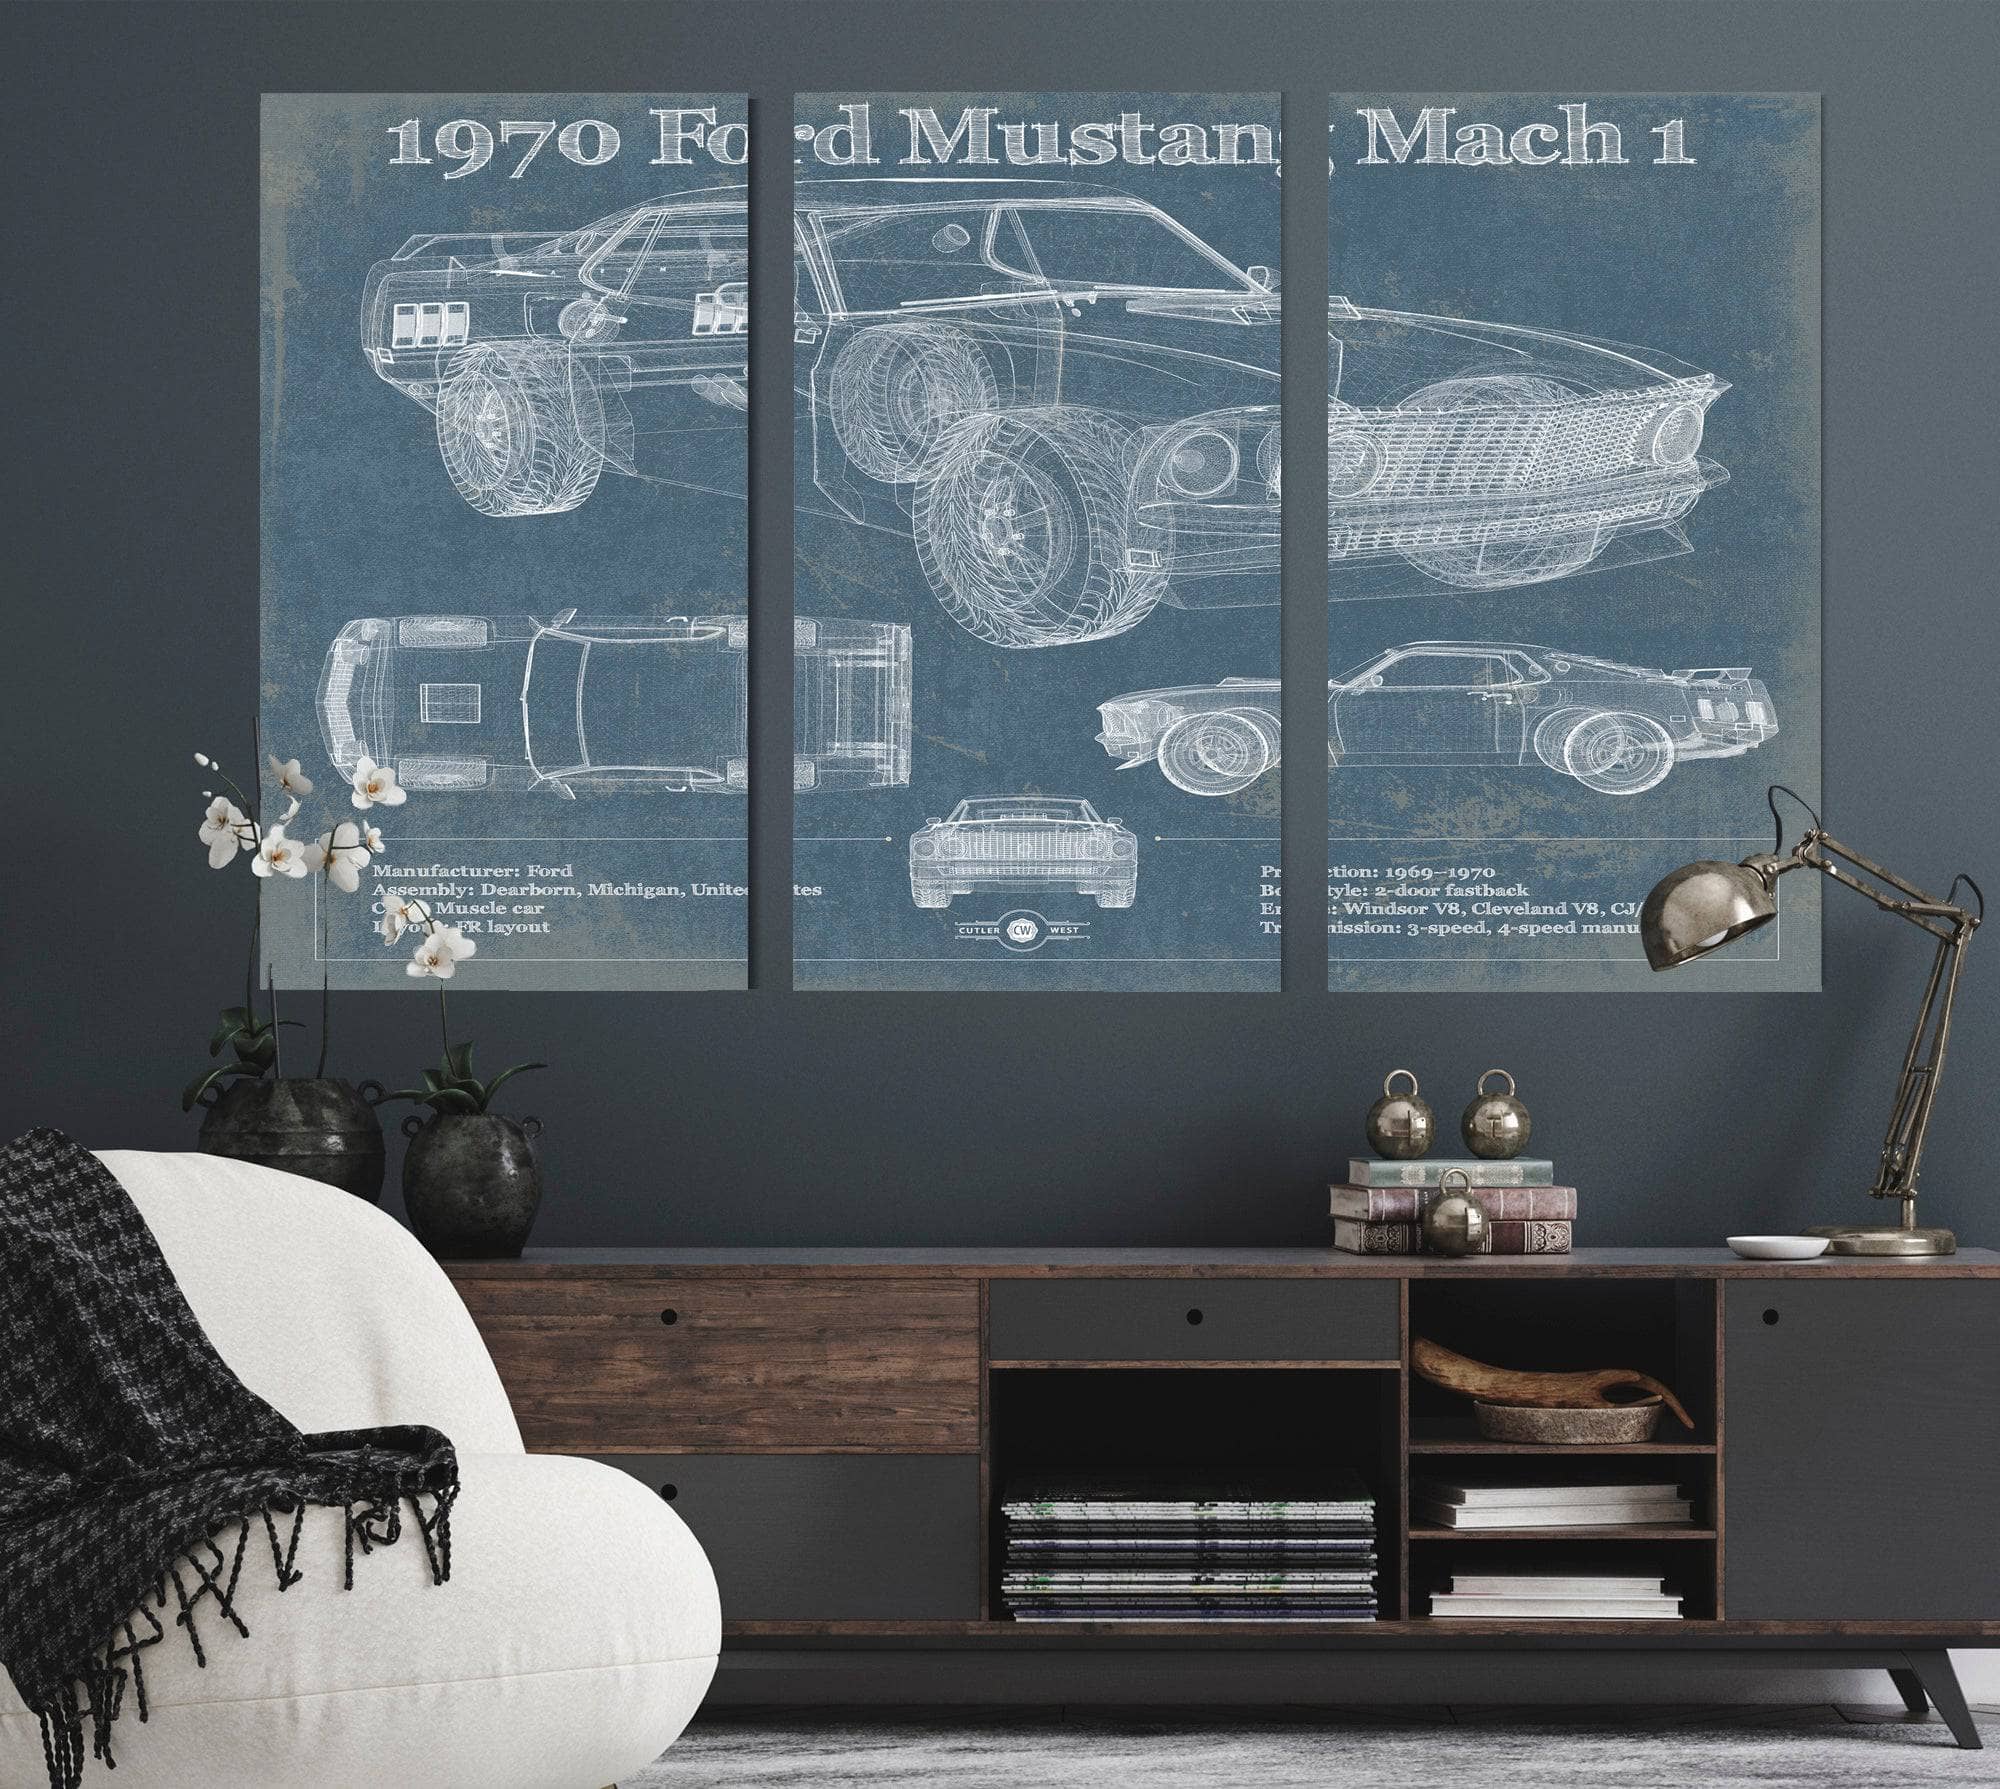 1970 Ford Mustang Mach 1 Vintage Blueprint Auto Print